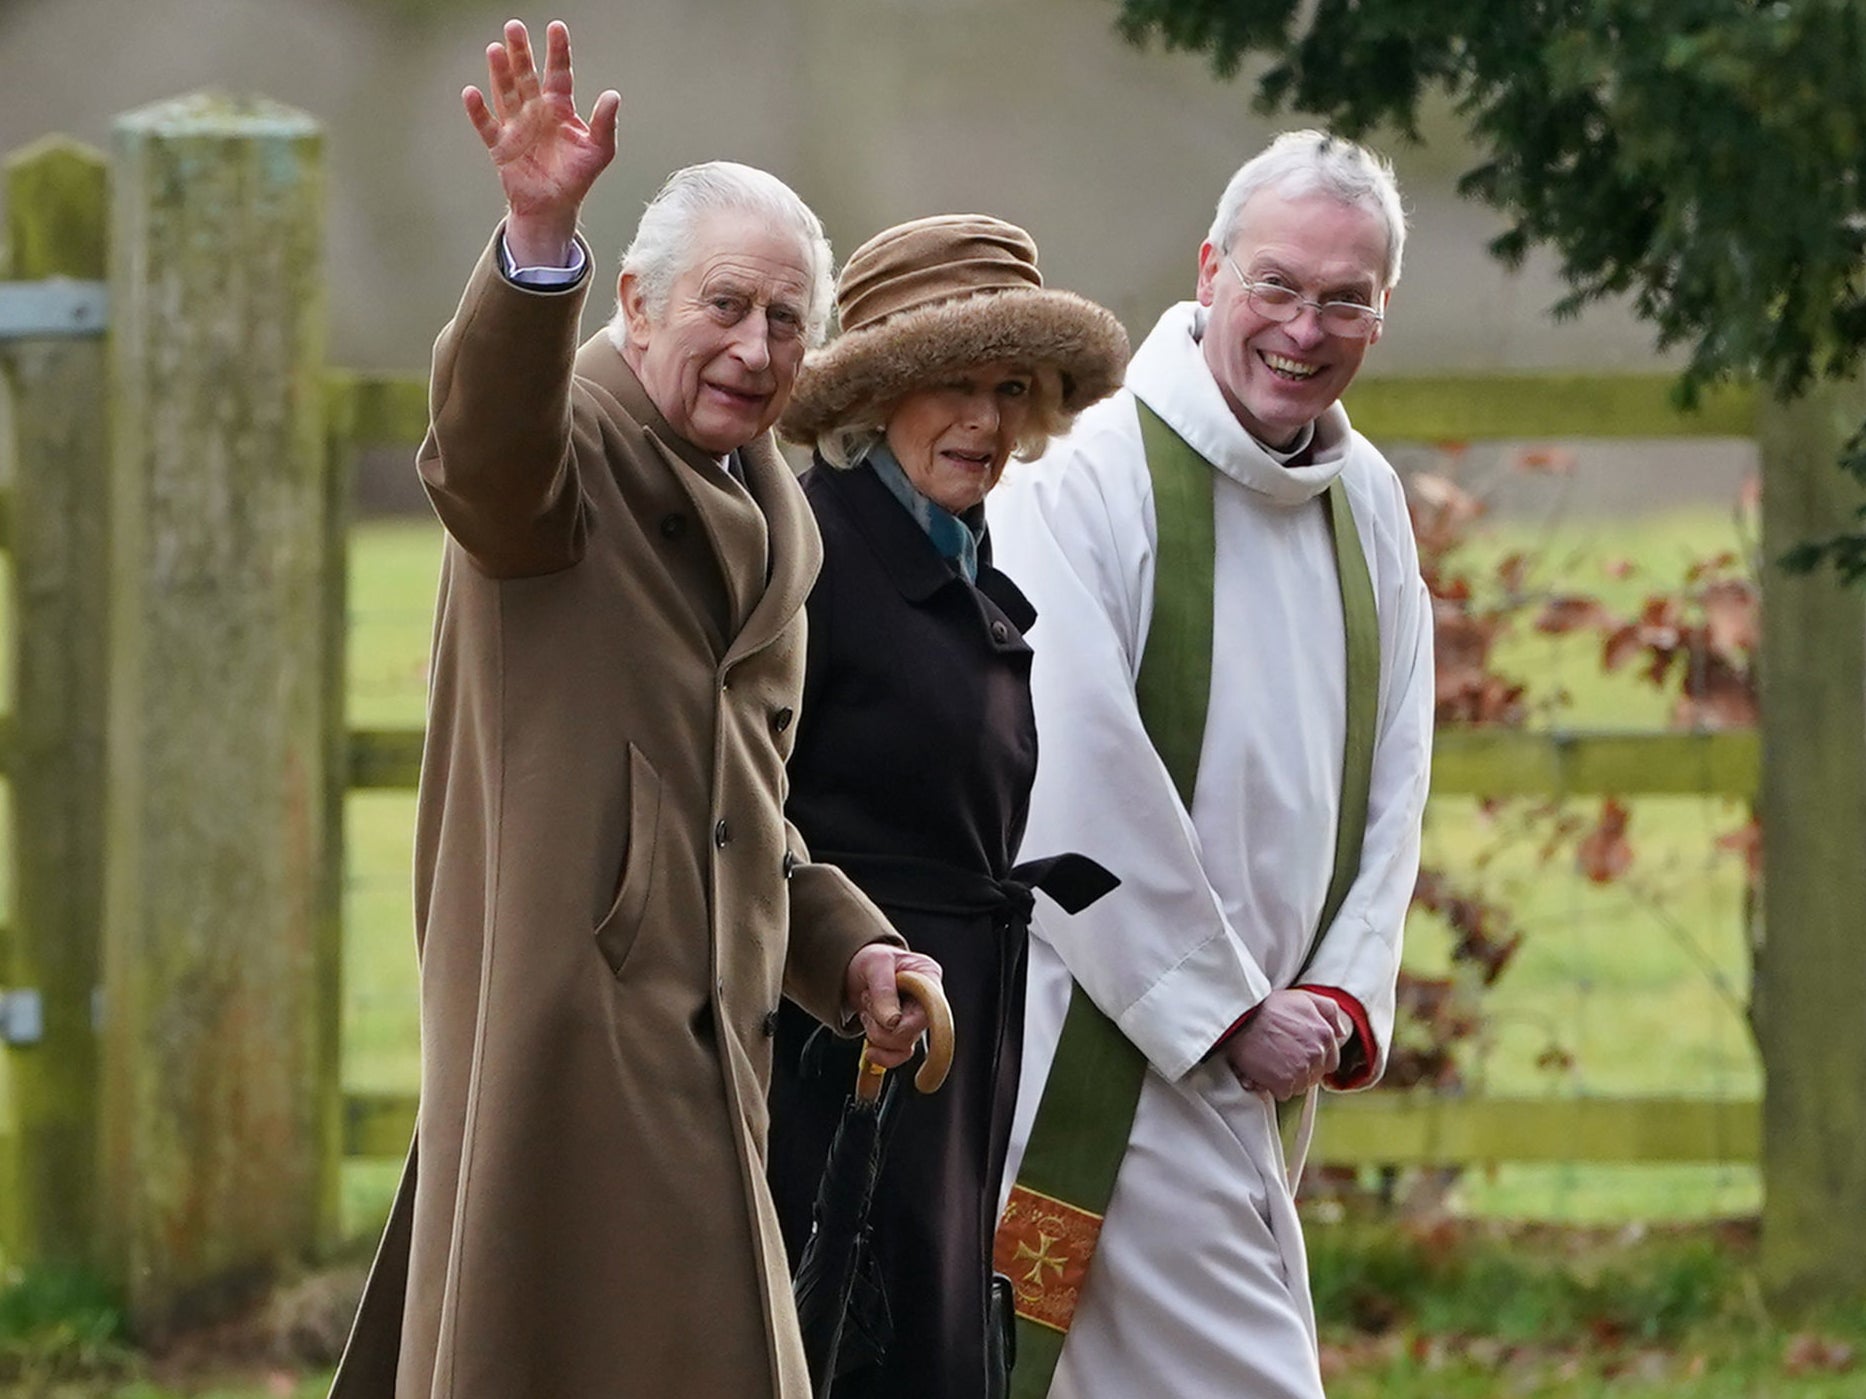 King Charles III and Queen Camilla arrive to attend a Sunday church service at St Mary Magdalene Church in Sandringham